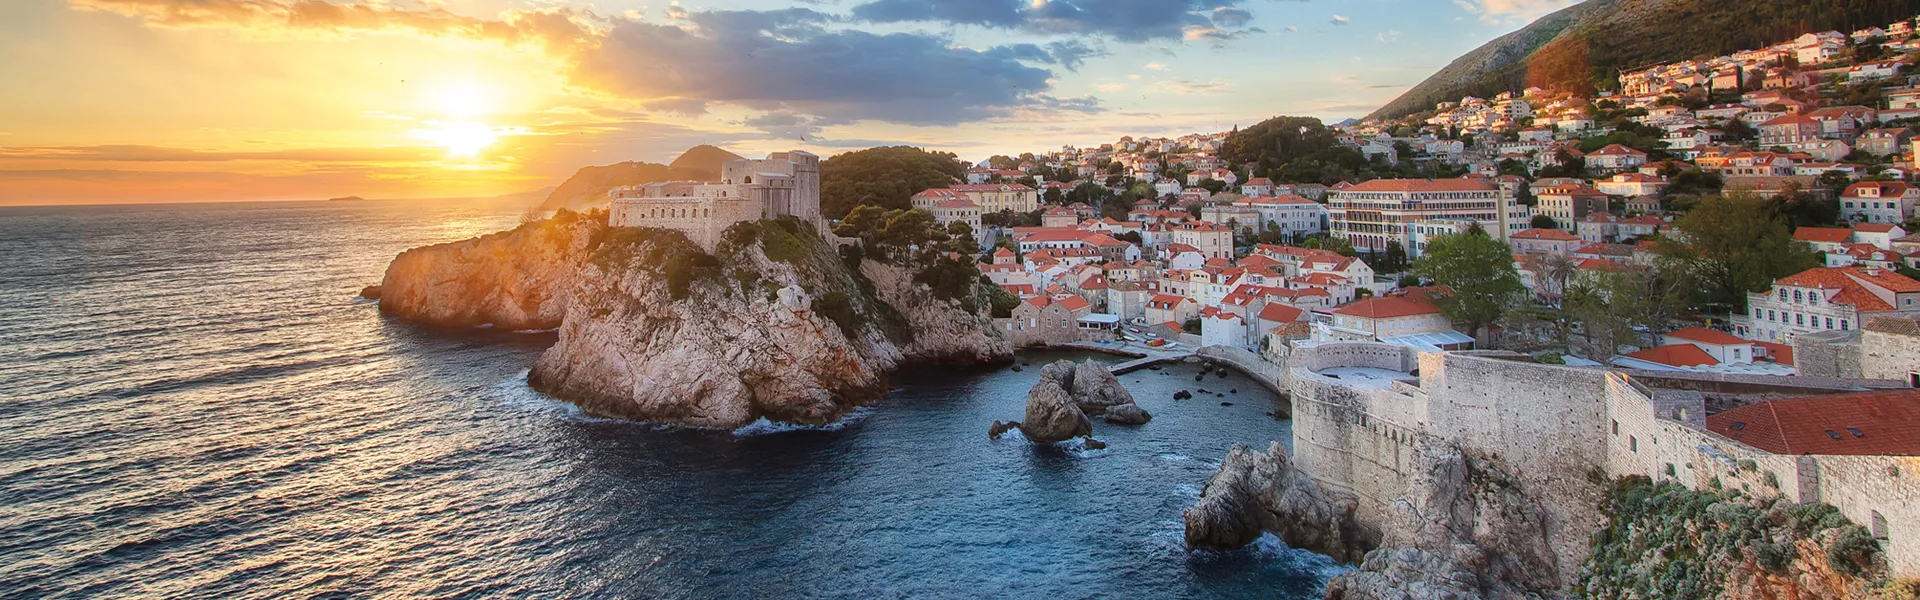 Croatia Guided Tours and Travel Guide